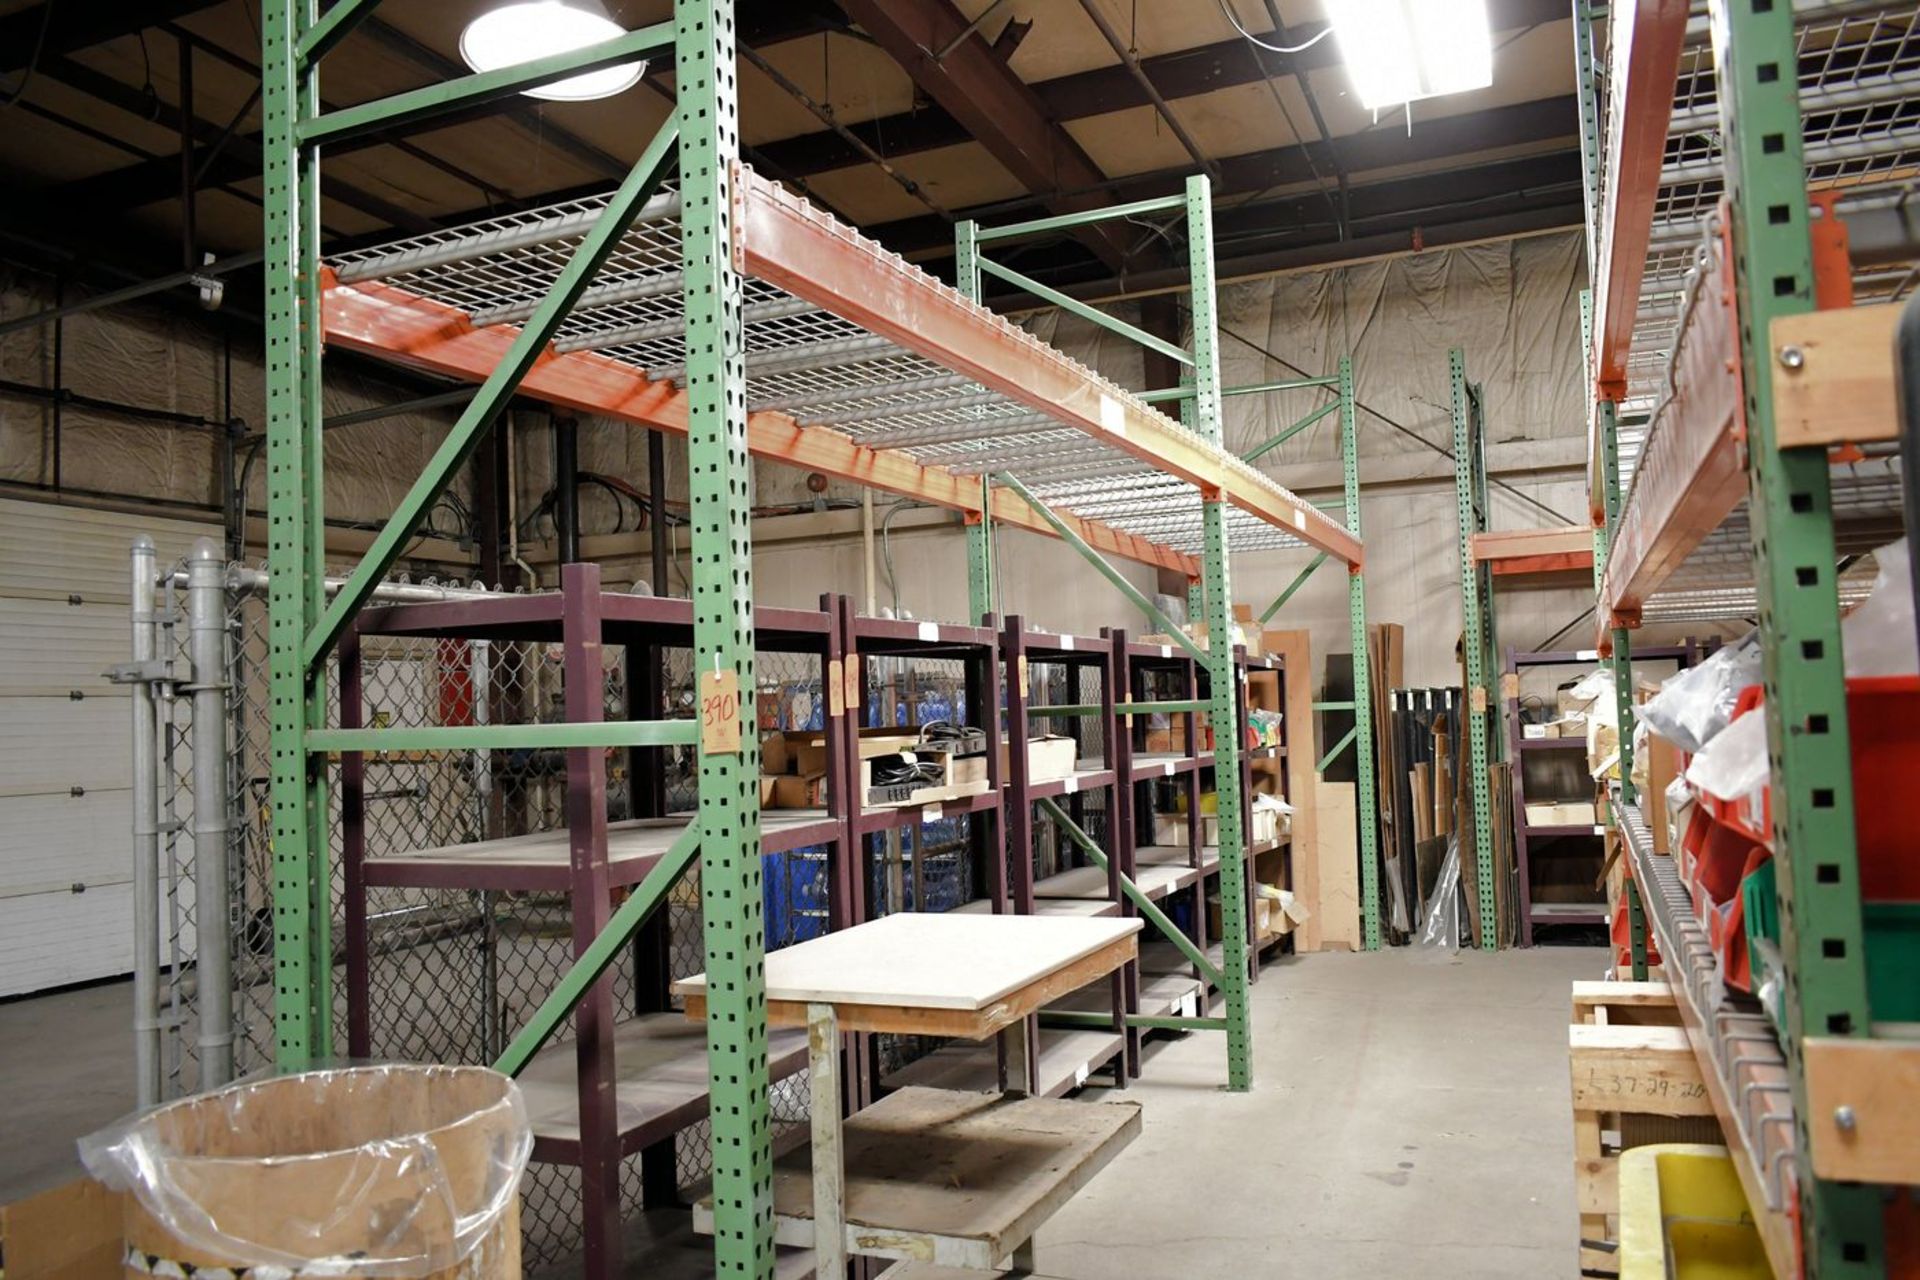 Lot - (8) Sections 11' x 42" x 11' 6"H Pallet Racking, (Contents Not Included), (Not to Be Removed - Image 3 of 3